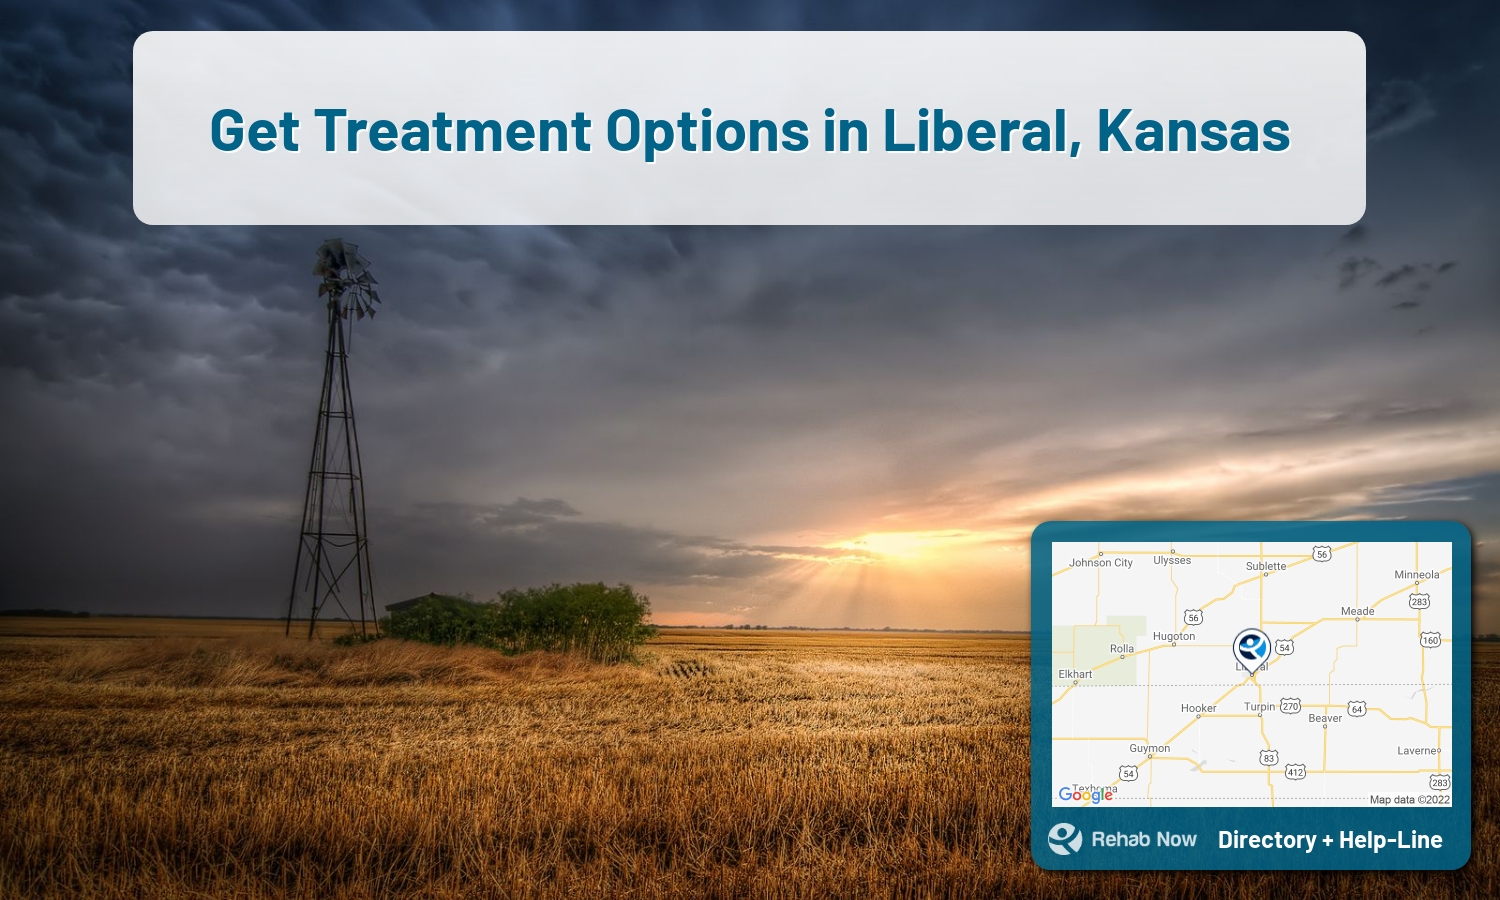 View options, availability, treatment methods, and more, for drug rehab and alcohol treatment in Liberal, Kansas